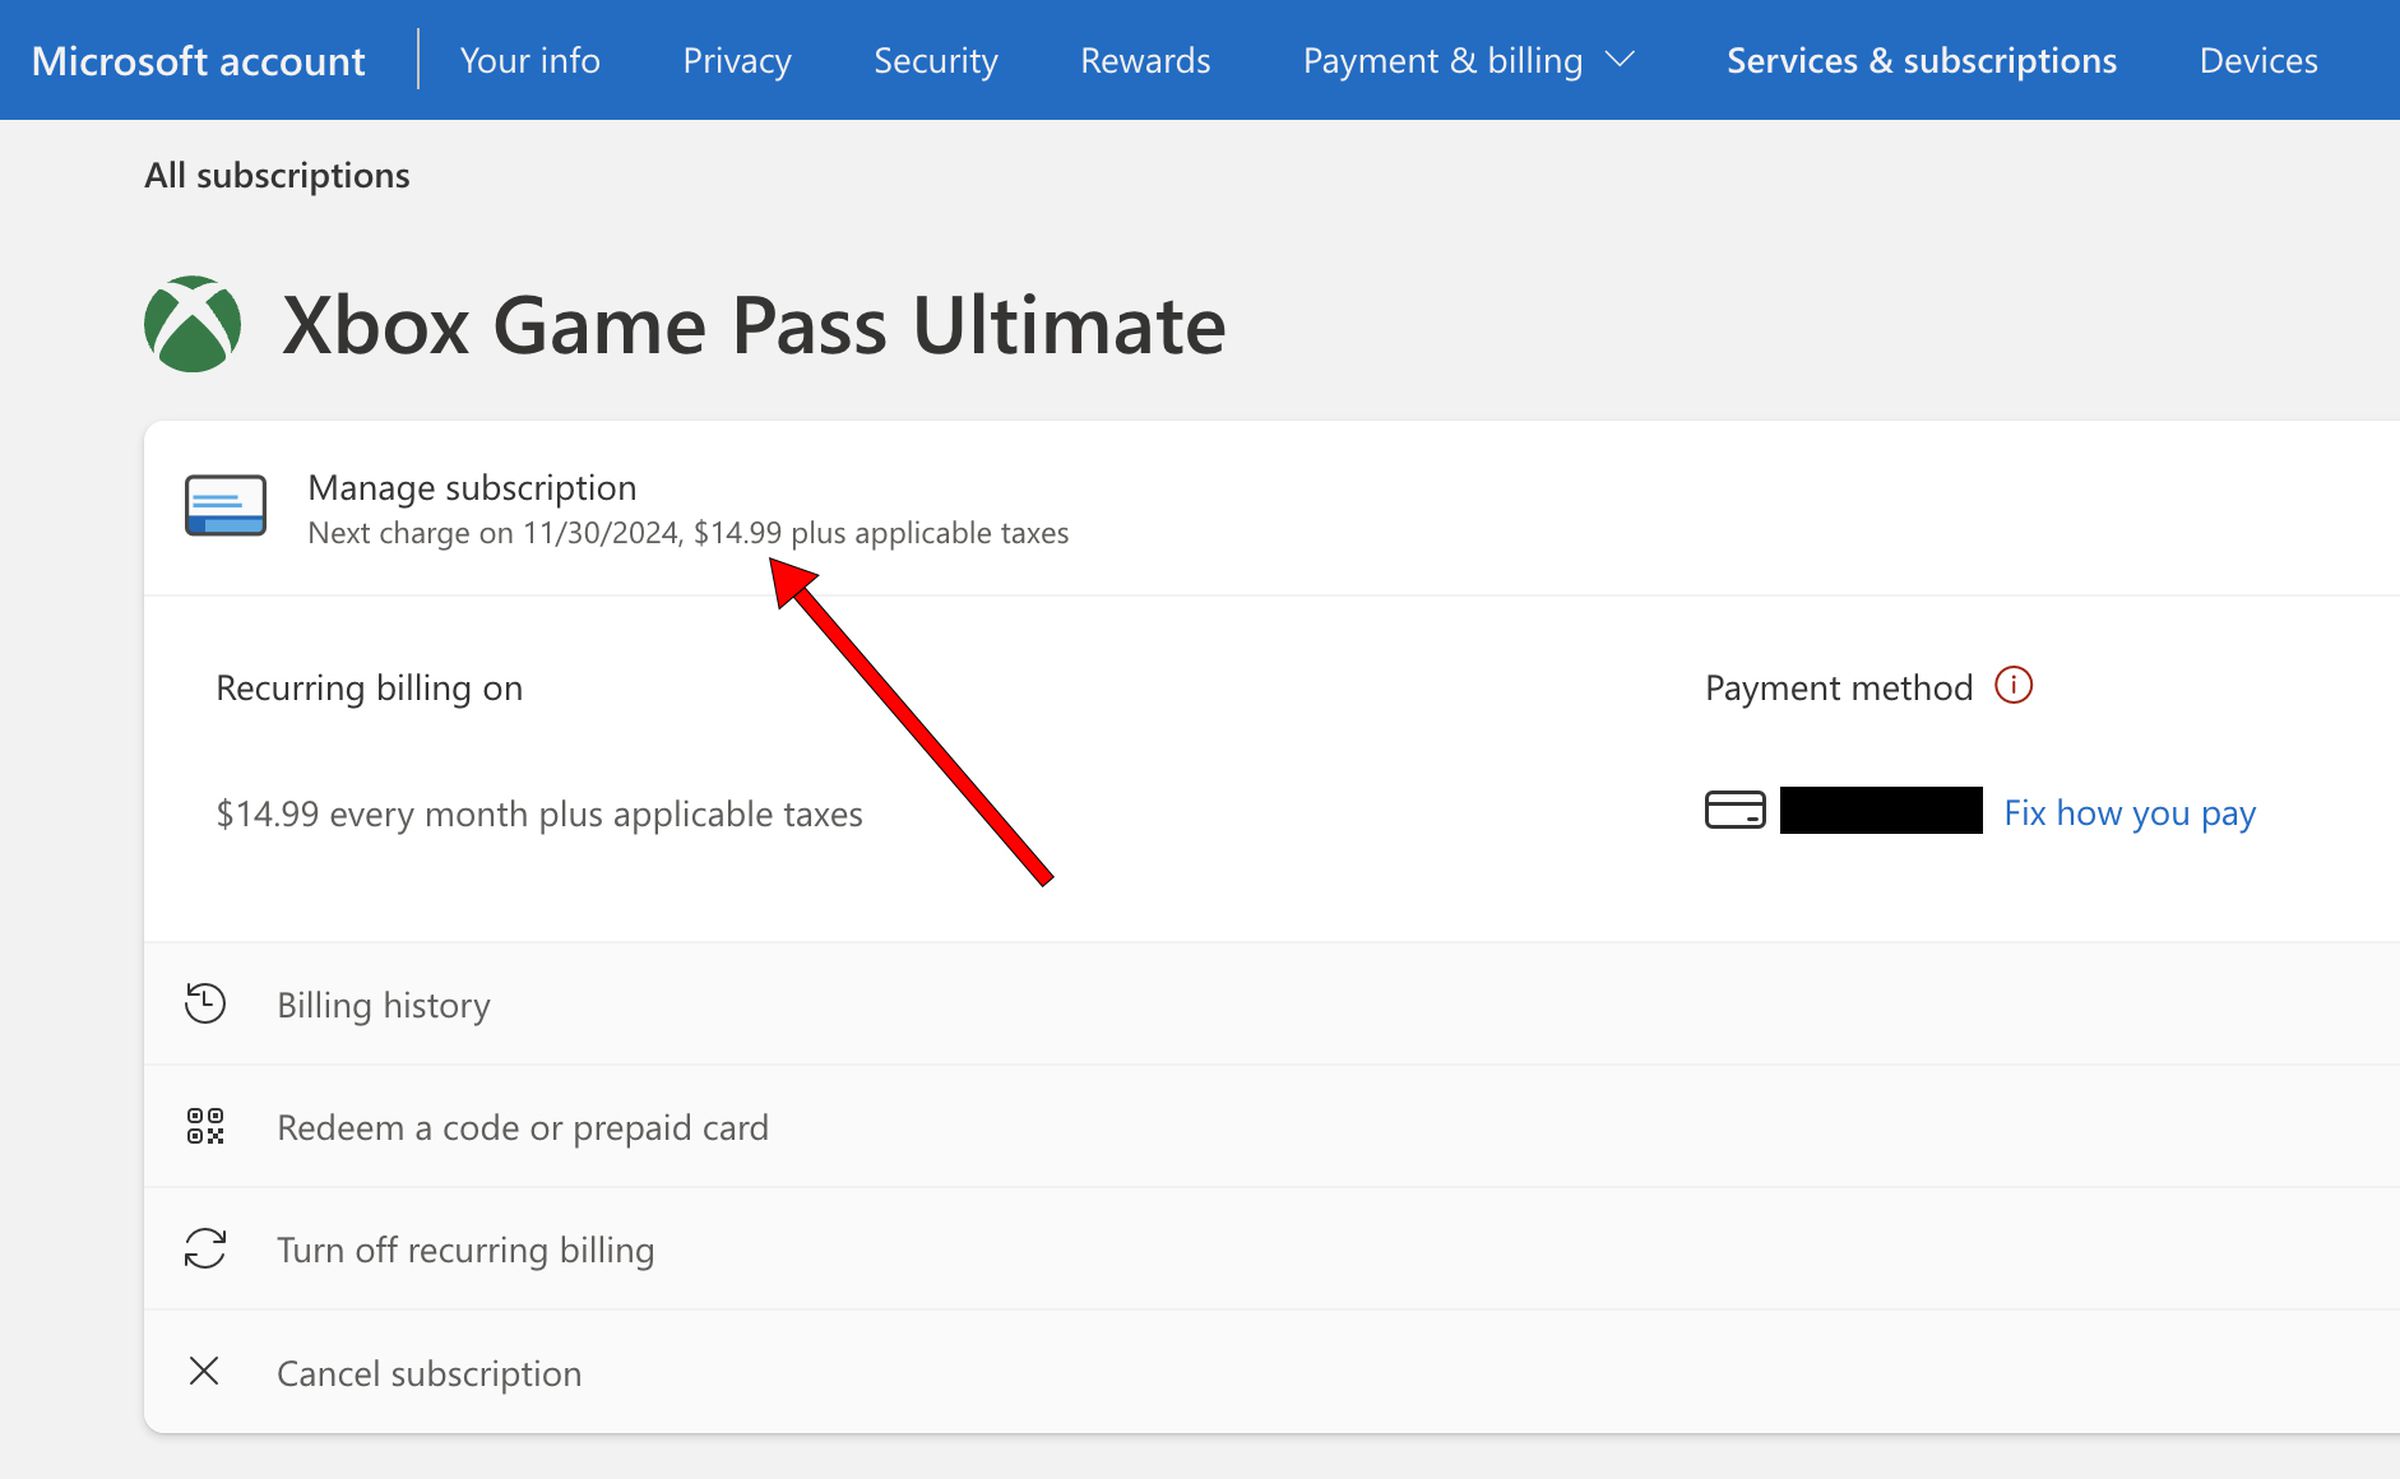 Once you buy the $1 Game Pass Ultimate trial, your prepaid months of Xbox Live Gold will automatically convert.